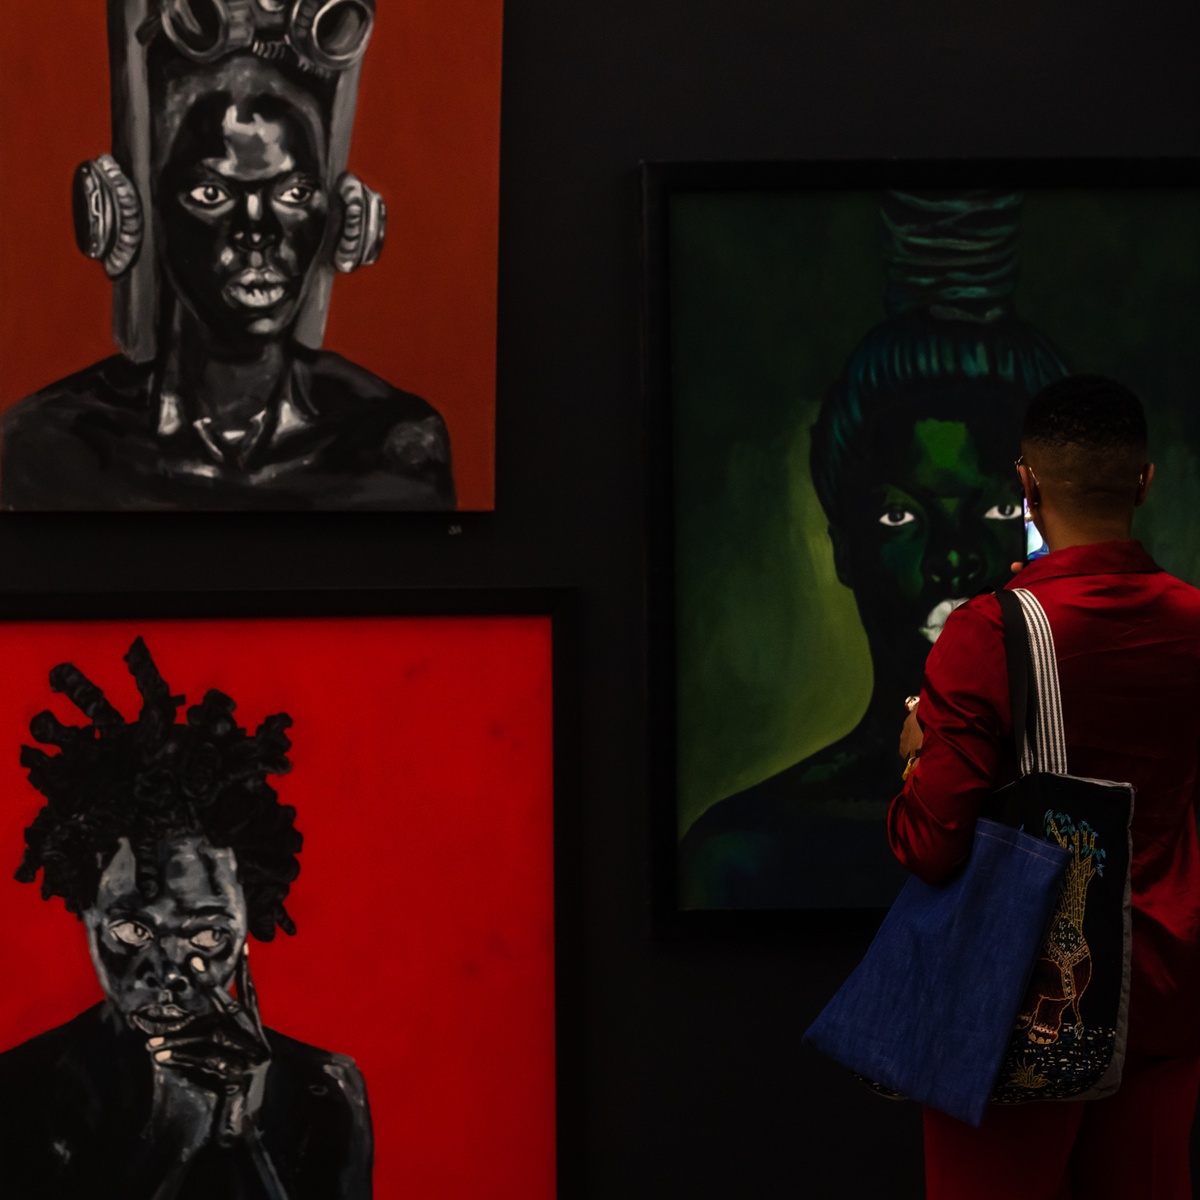 Event photograph from the opening of the “Ikhono LaseNatali” exhibition in A4’s Gallery. At the back, Ncumisa Mcitwa’s acrylic painting “Somnyama Ngonyama, ‘Namhla at Cassibaus’,” Sphephelo Mnguni’s acrylic painting “Somnyama Ngonyama ‘Khwezi’” and Nomusa Musah Mtshali’s acrylic painting “Somnyama Ngonyama” are mounted on a black gallery wall. At the front, an attendee stands in the gallery.
